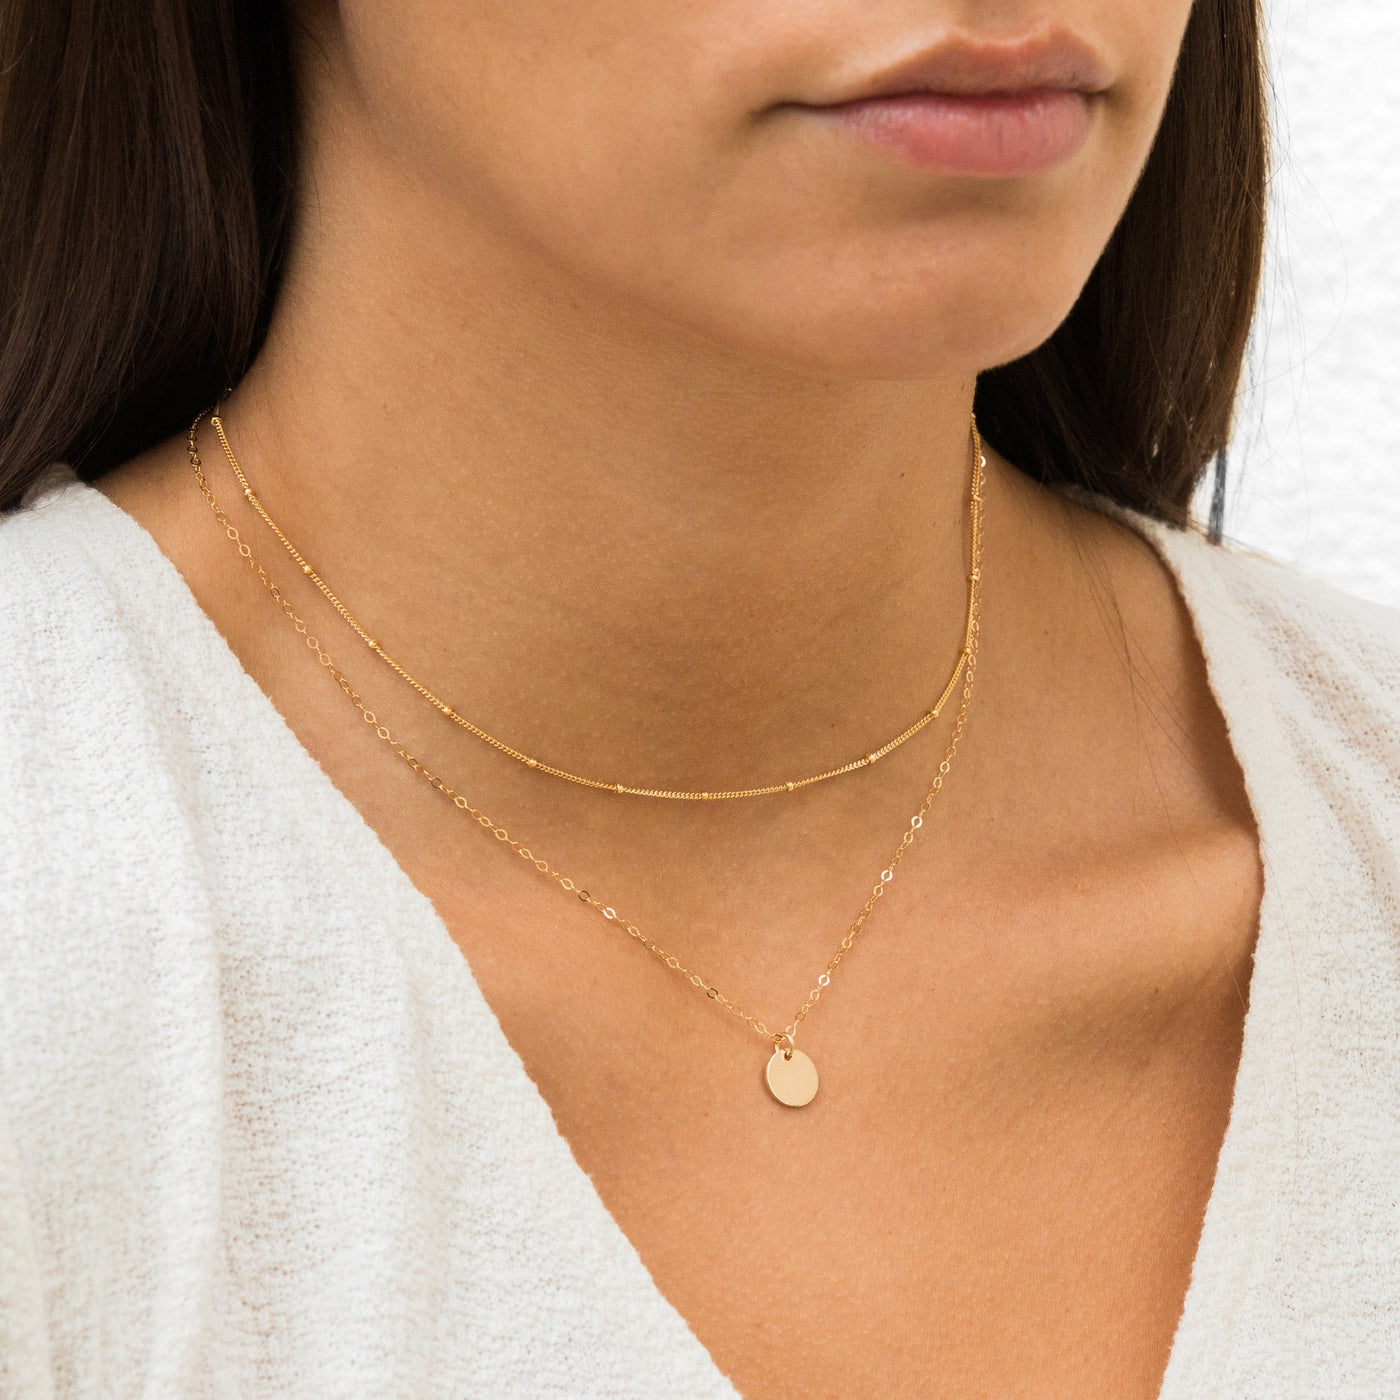 Satellite & Coin Necklace Set | Simple & Dainty Jewelry